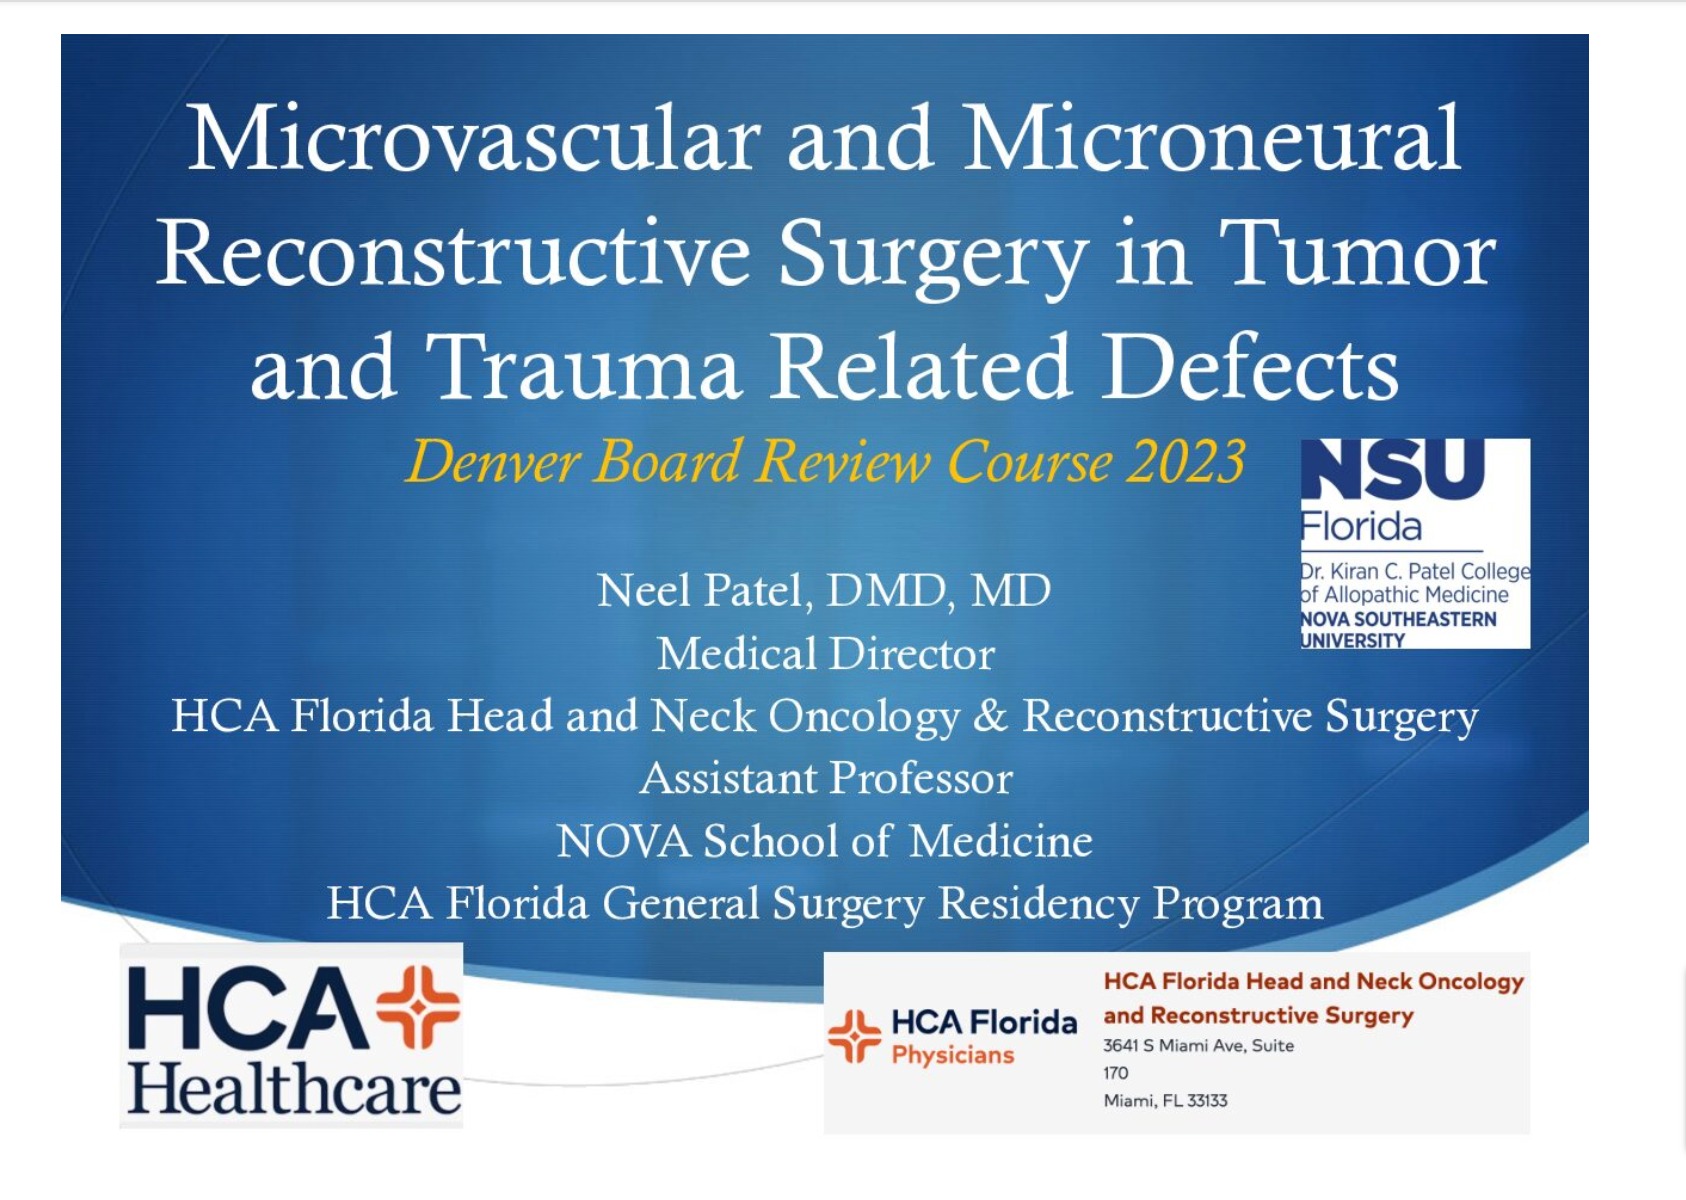 Microvascular and Microneural Reconstruction of Tumor and Trauma Related Defects